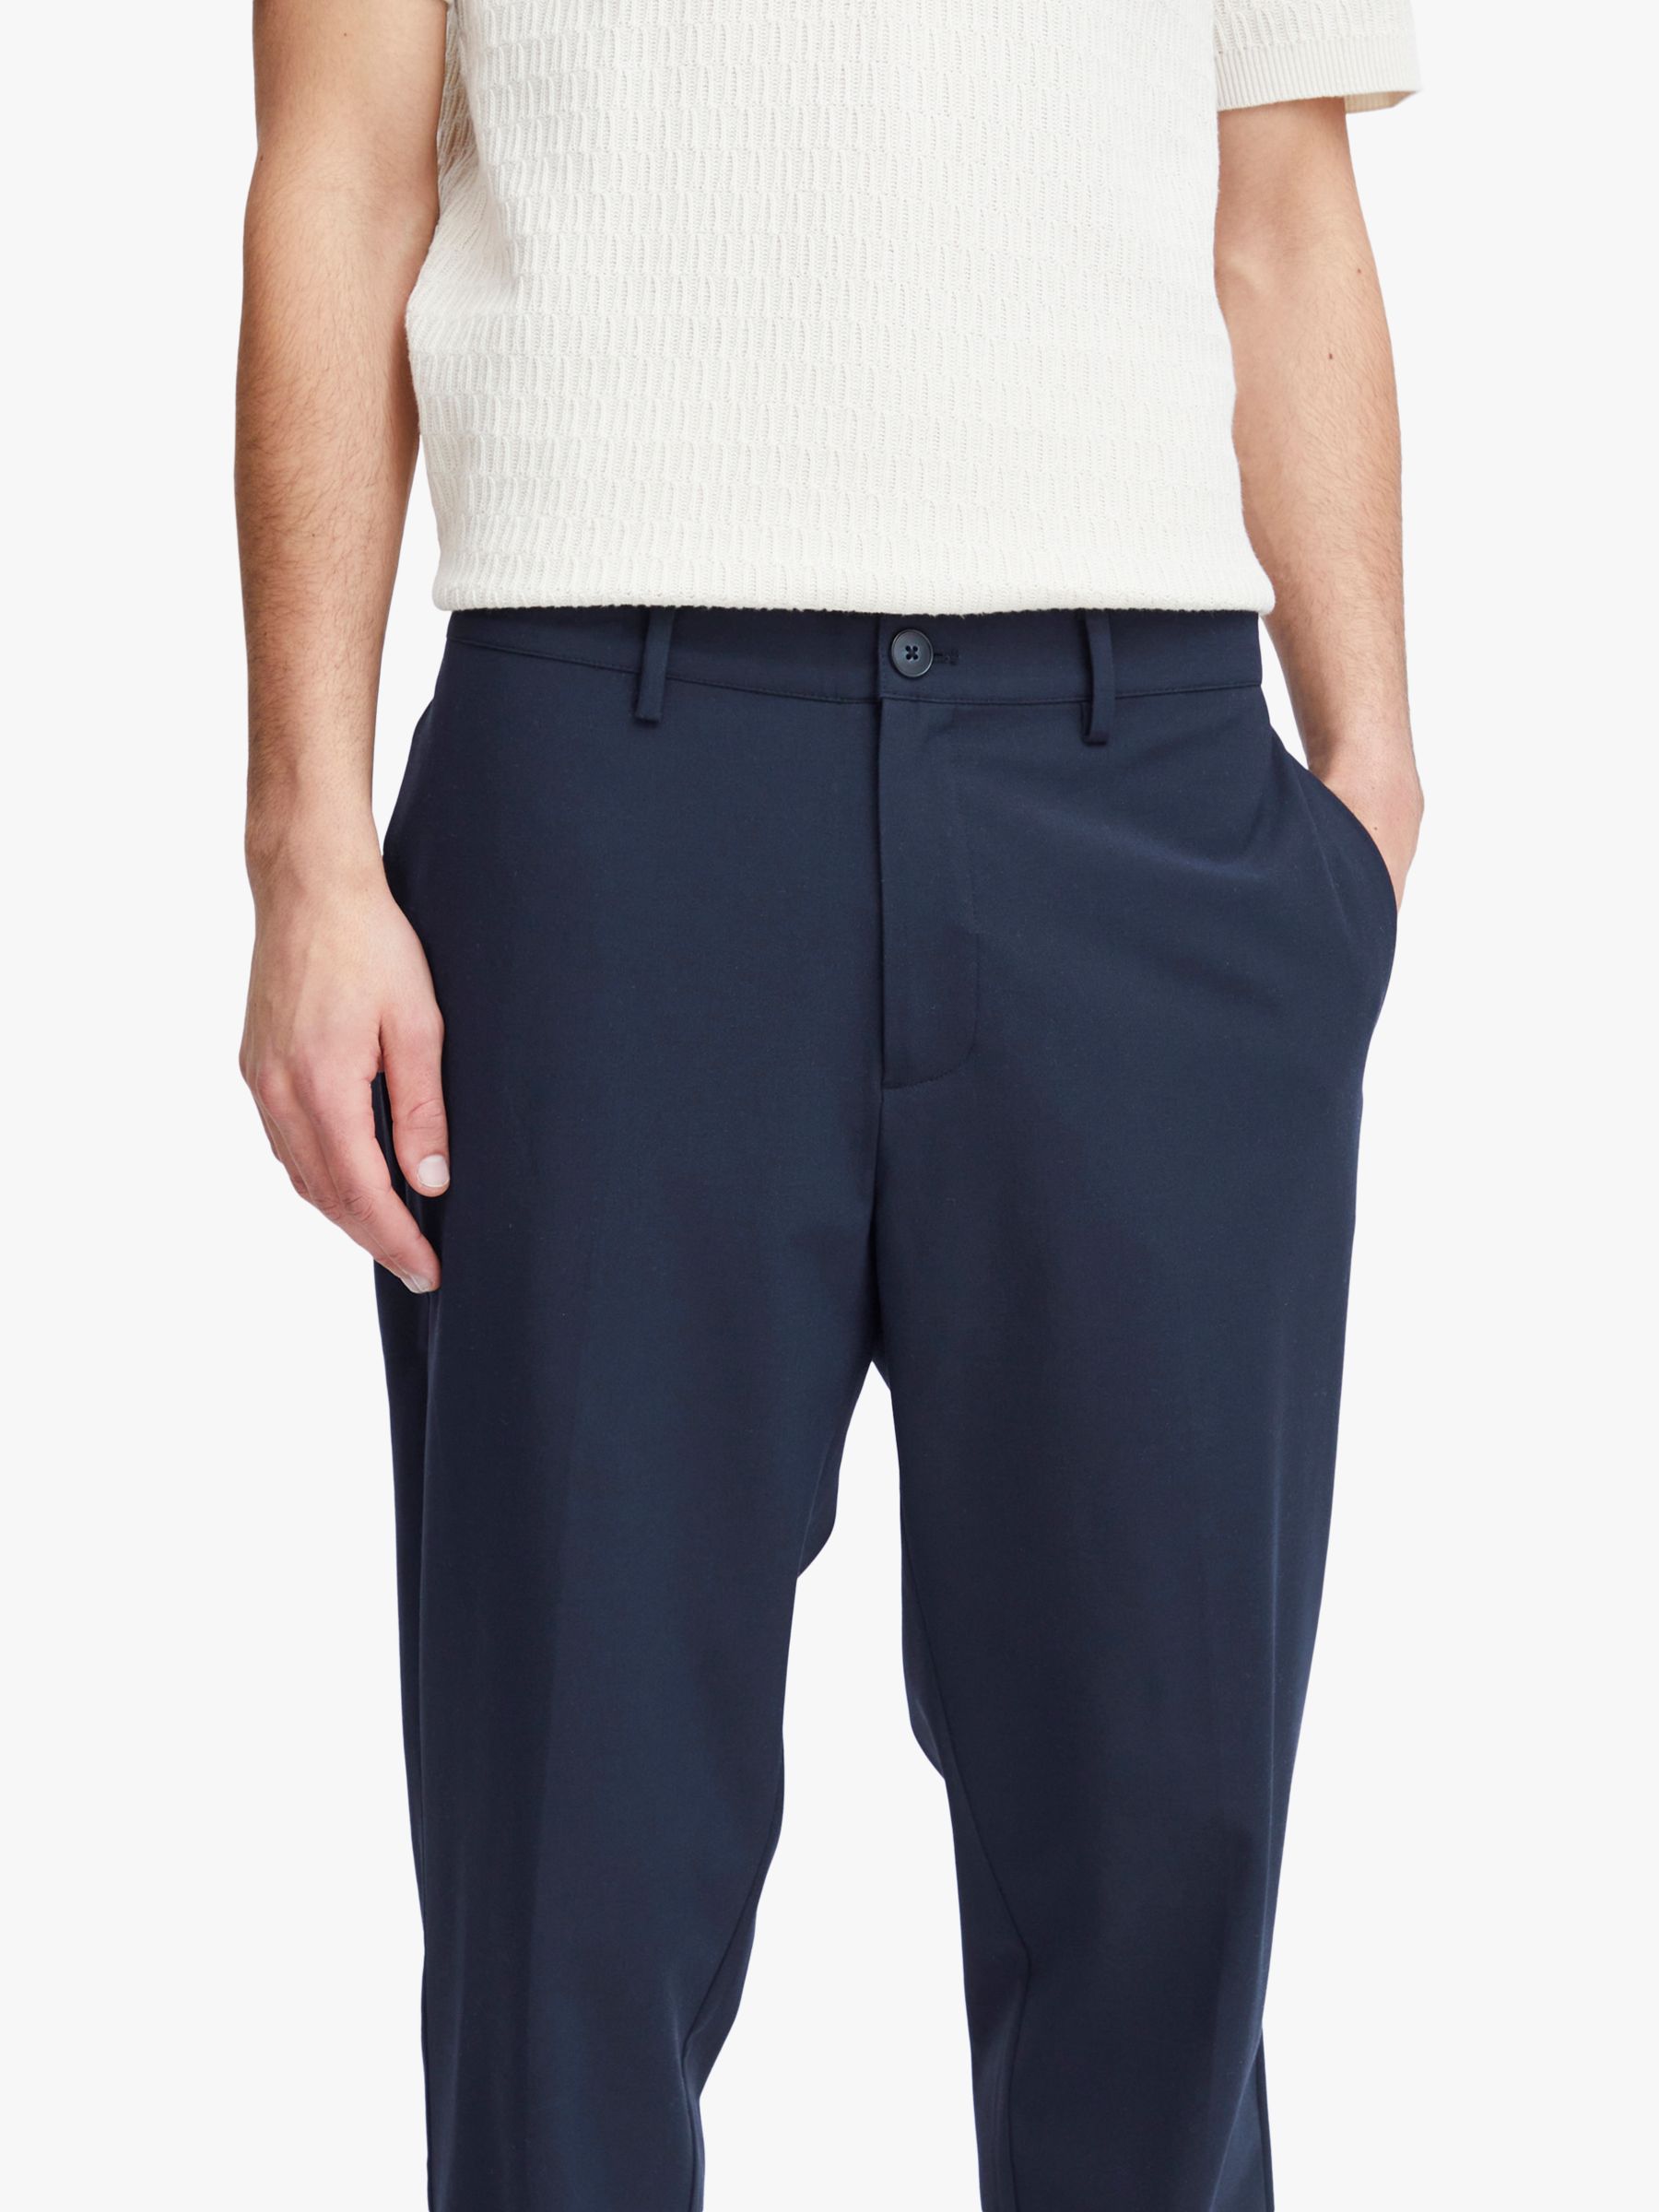 Casual Friday Pepe Stretch Trousers, Dark Navy at John Lewis & Partners